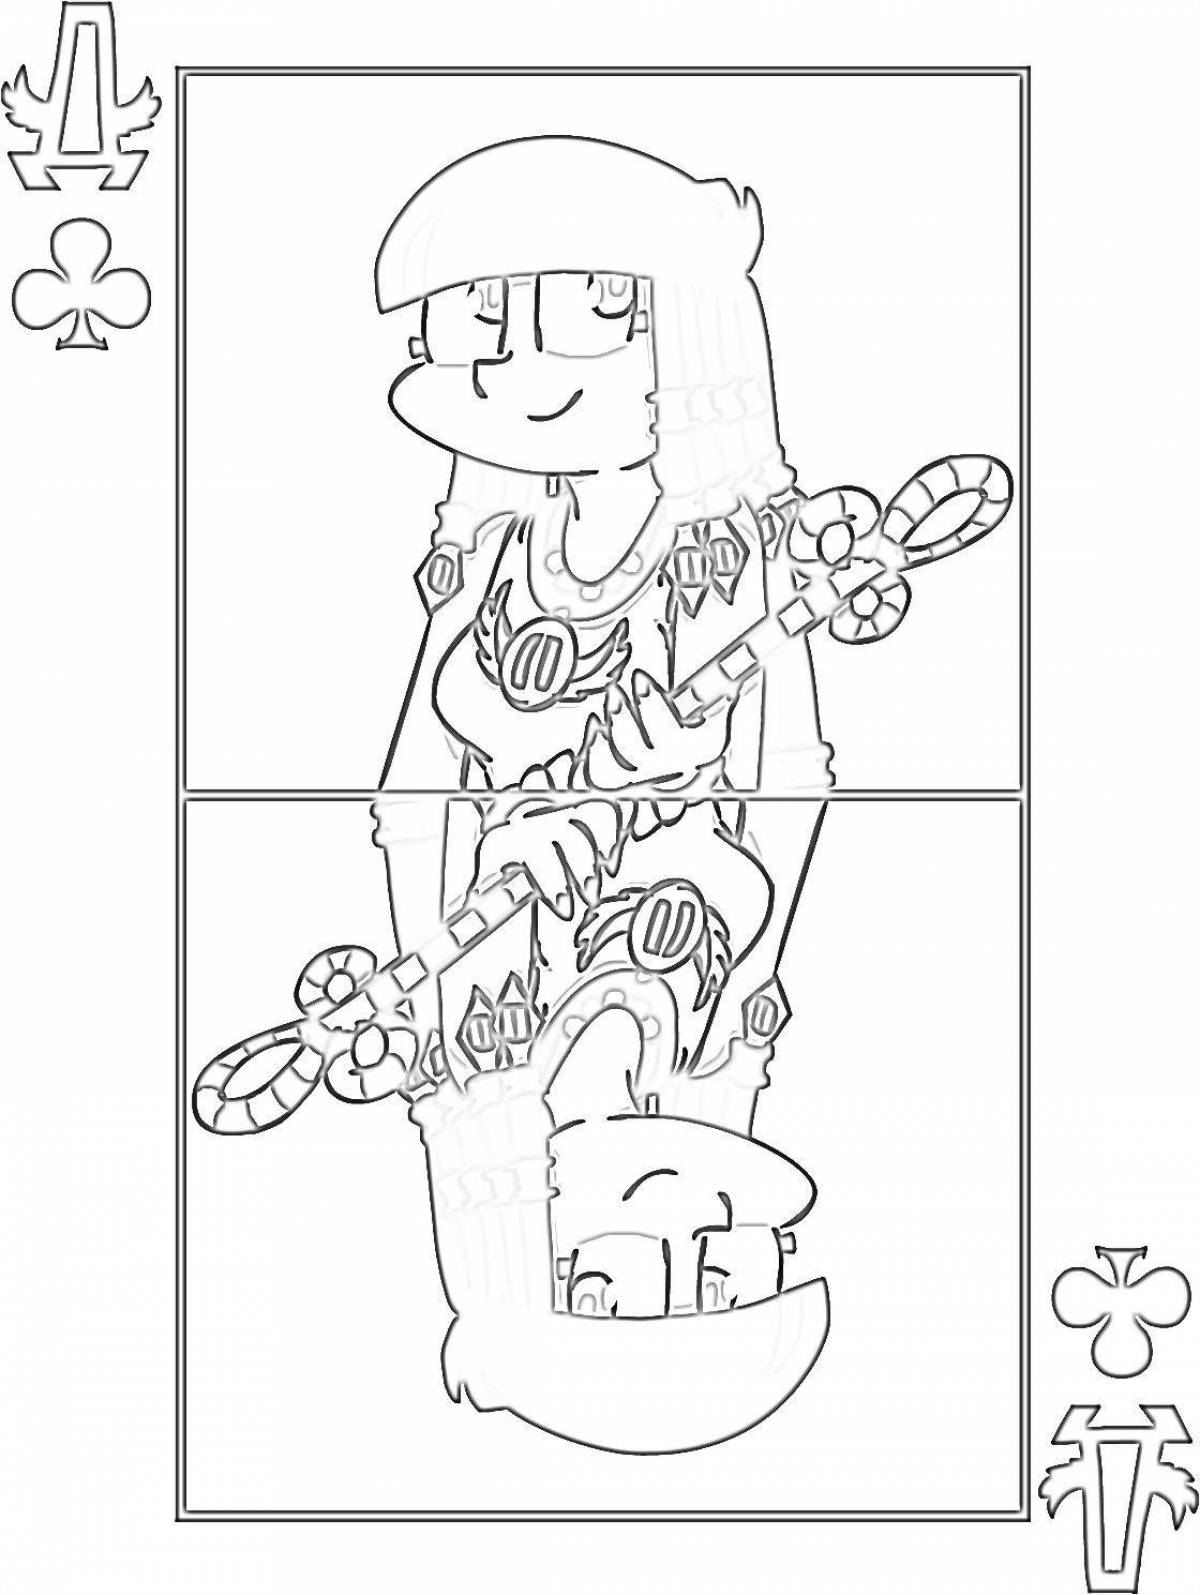 Imaginative comic 13 cards coloring page